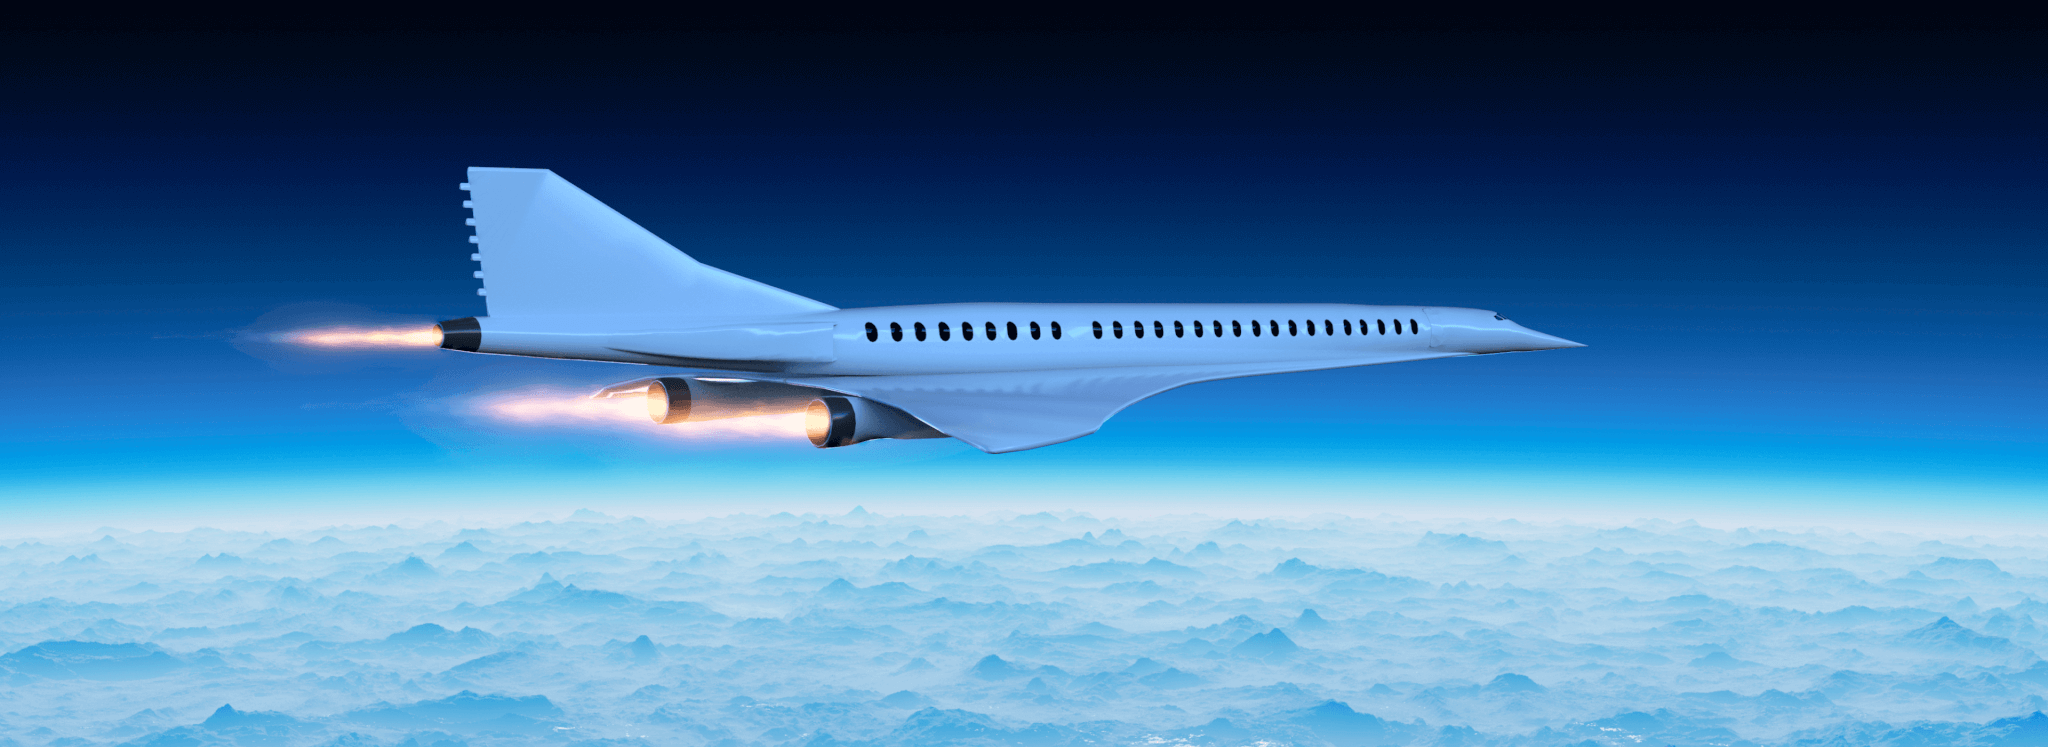 Why supersonic aircraft are a bad idea for climate